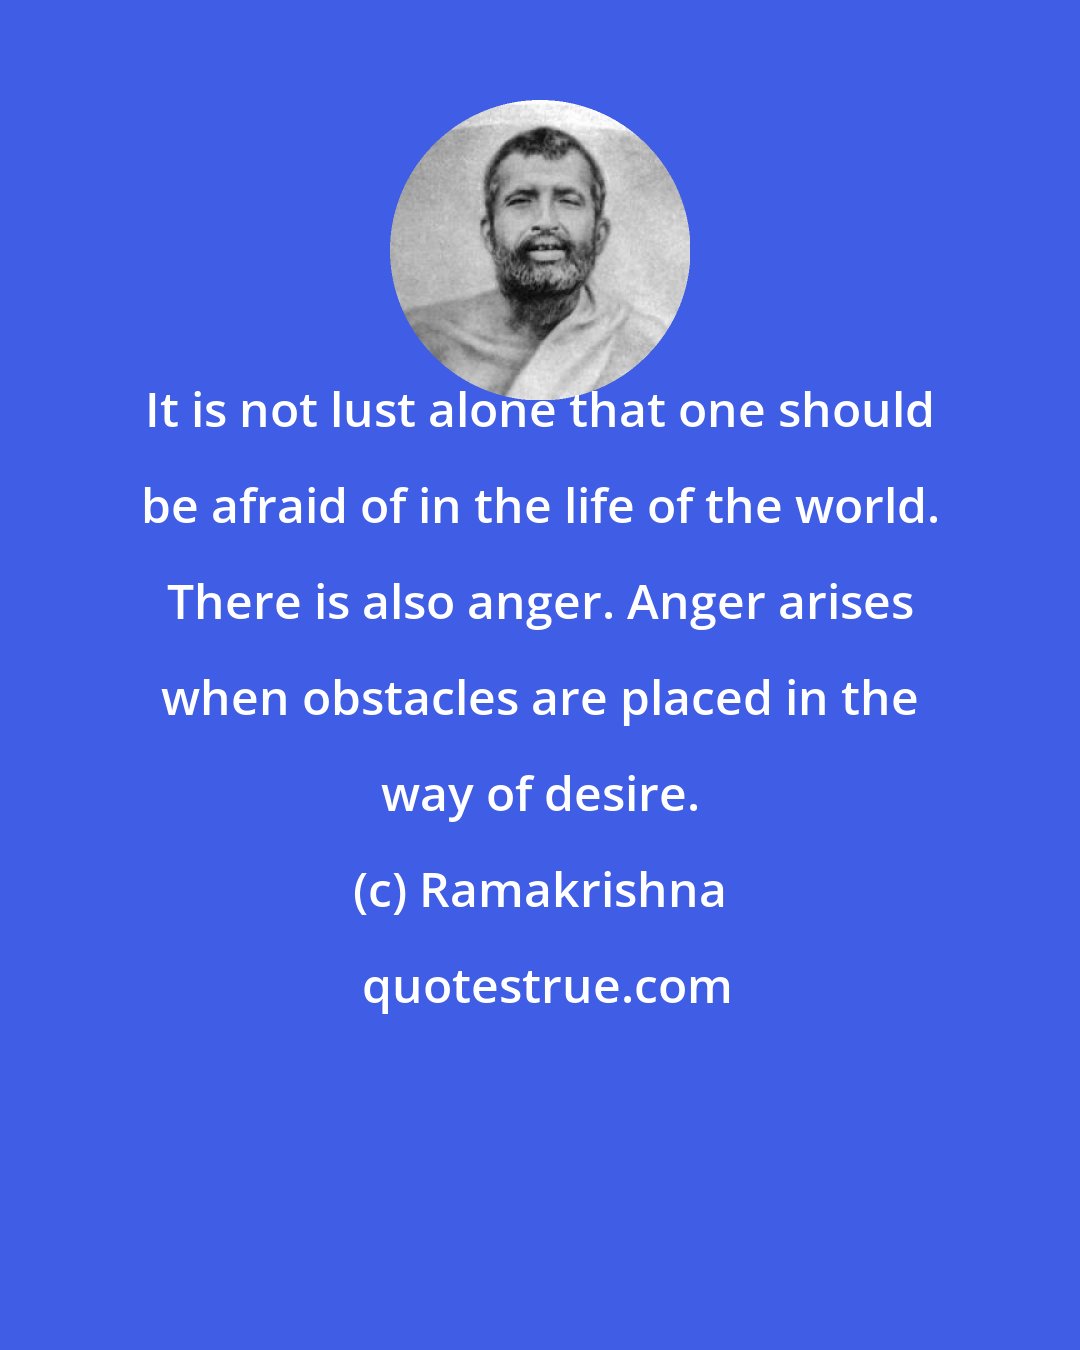 Ramakrishna: It is not lust alone that one should be afraid of in the life of the world. There is also anger. Anger arises when obstacles are placed in the way of desire.